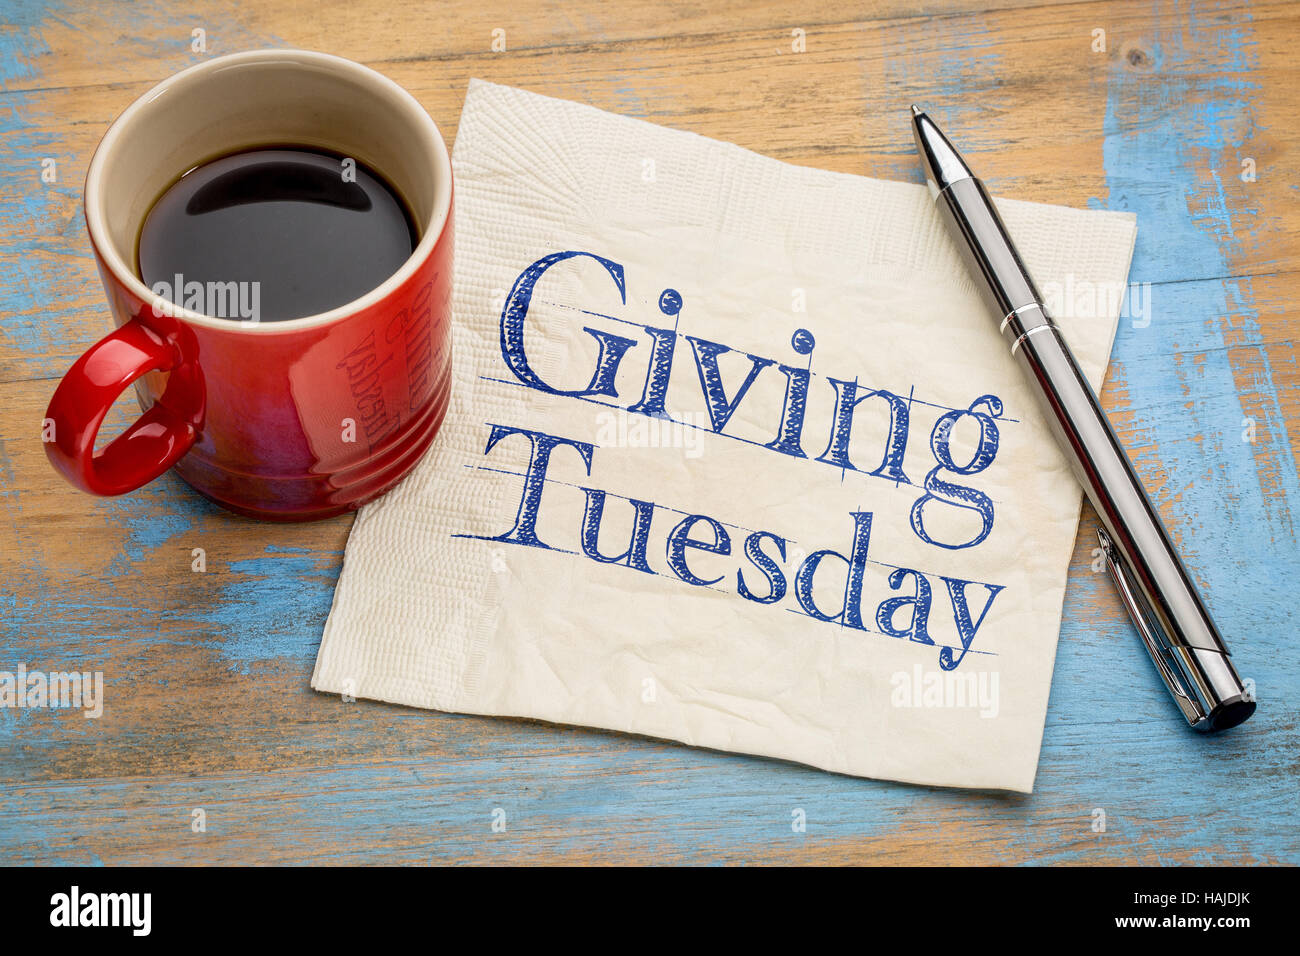 Giving Tuesday  - handwriting on a napkin with a cup of espresso coffee Stock Photo